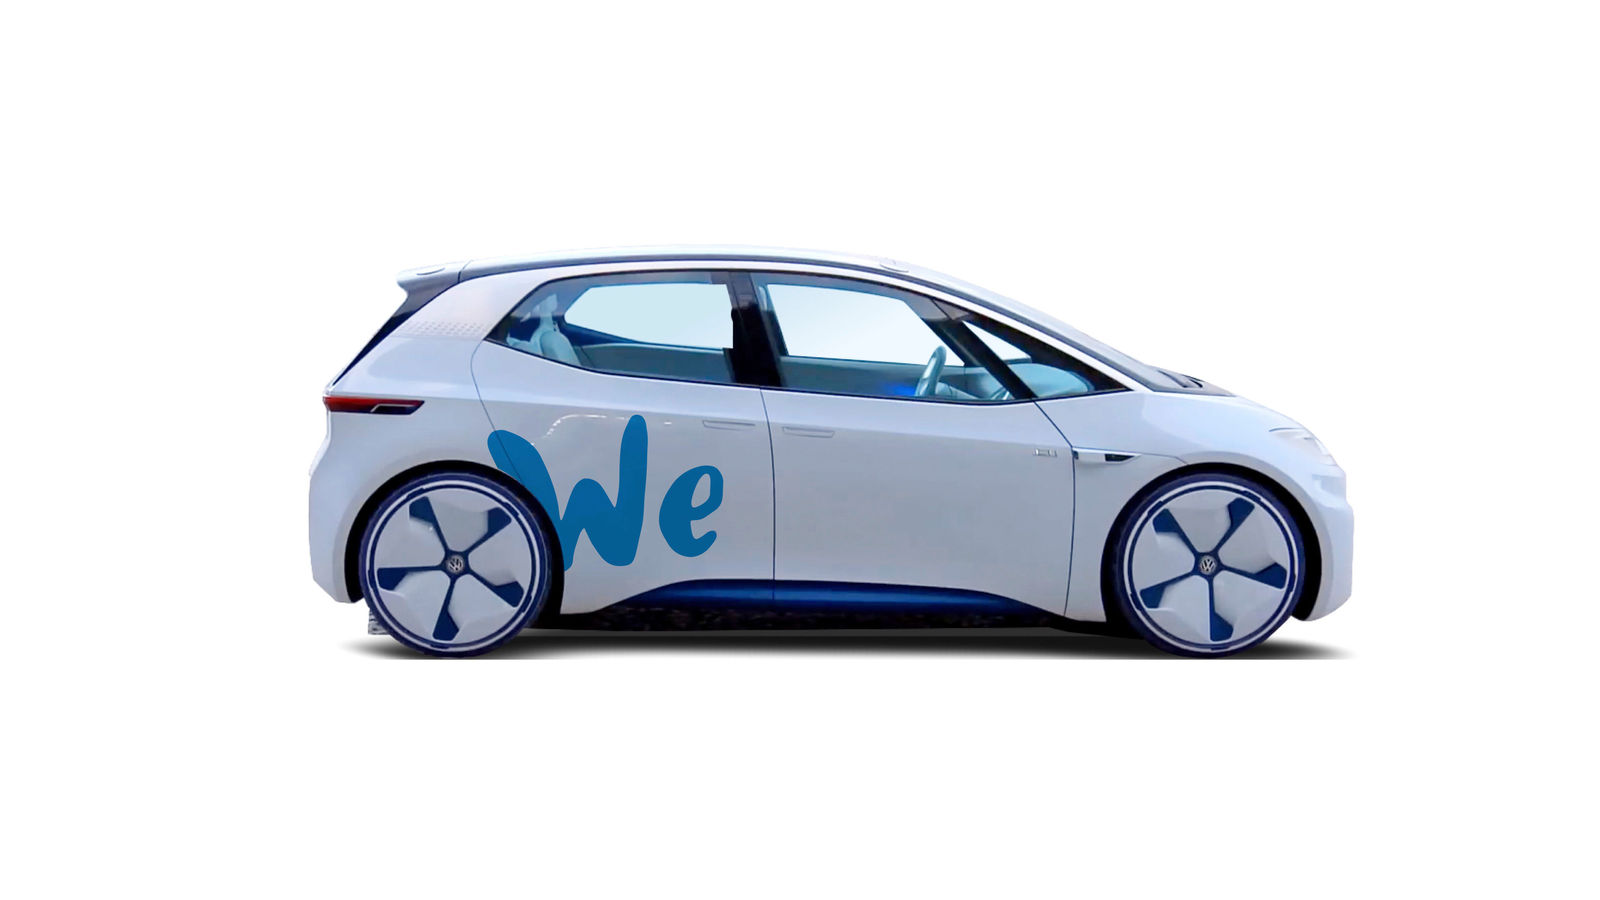 Volkswagen to offer “zero-emission” car sharing services in future